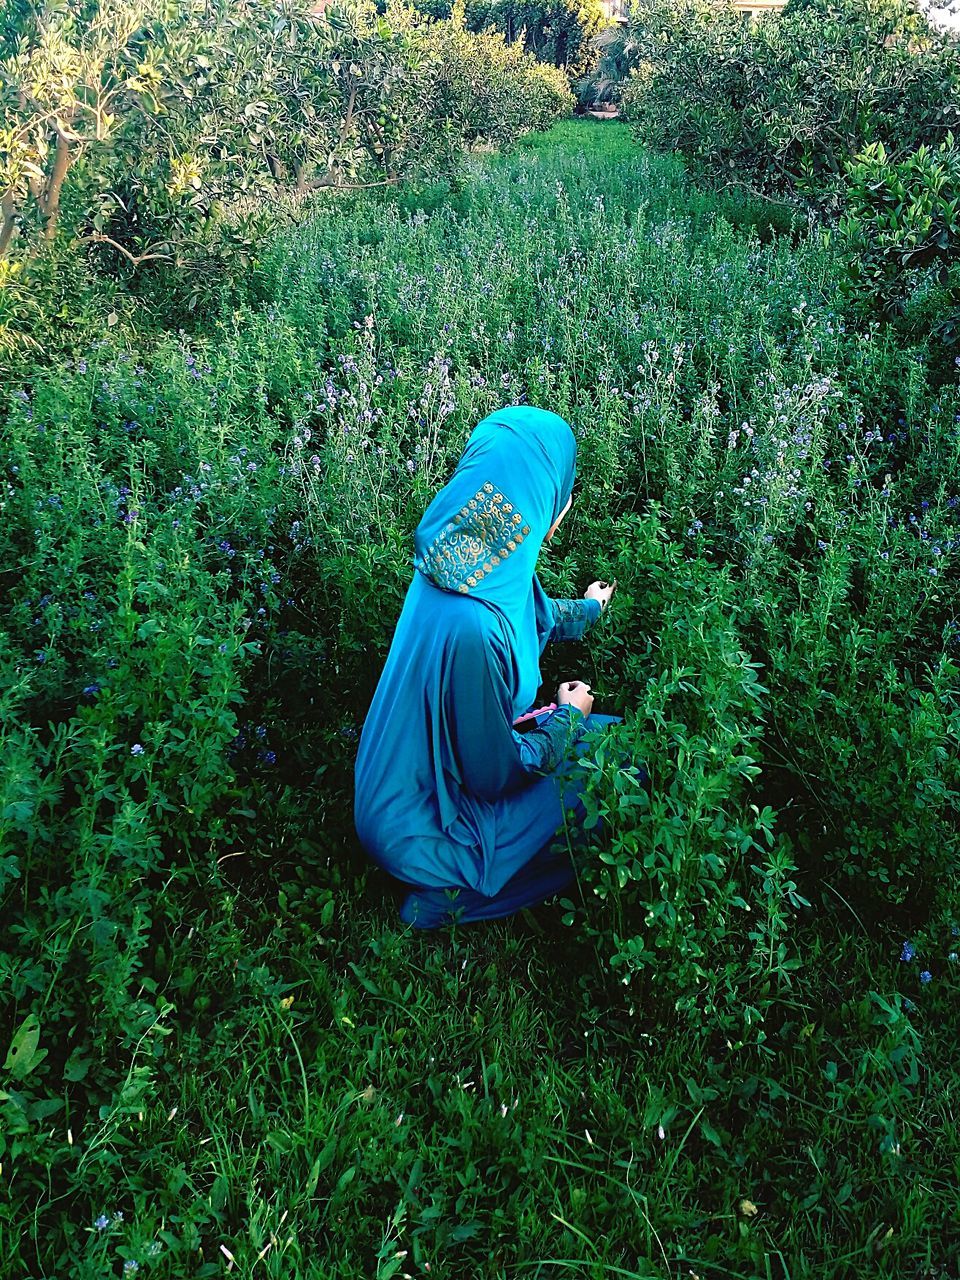 plant, green color, growth, one person, real people, land, tree, nature, leisure activity, day, lifestyles, forest, casual clothing, field, beauty in nature, three quarter length, tranquility, full length, blue, outdoors, hood - clothing